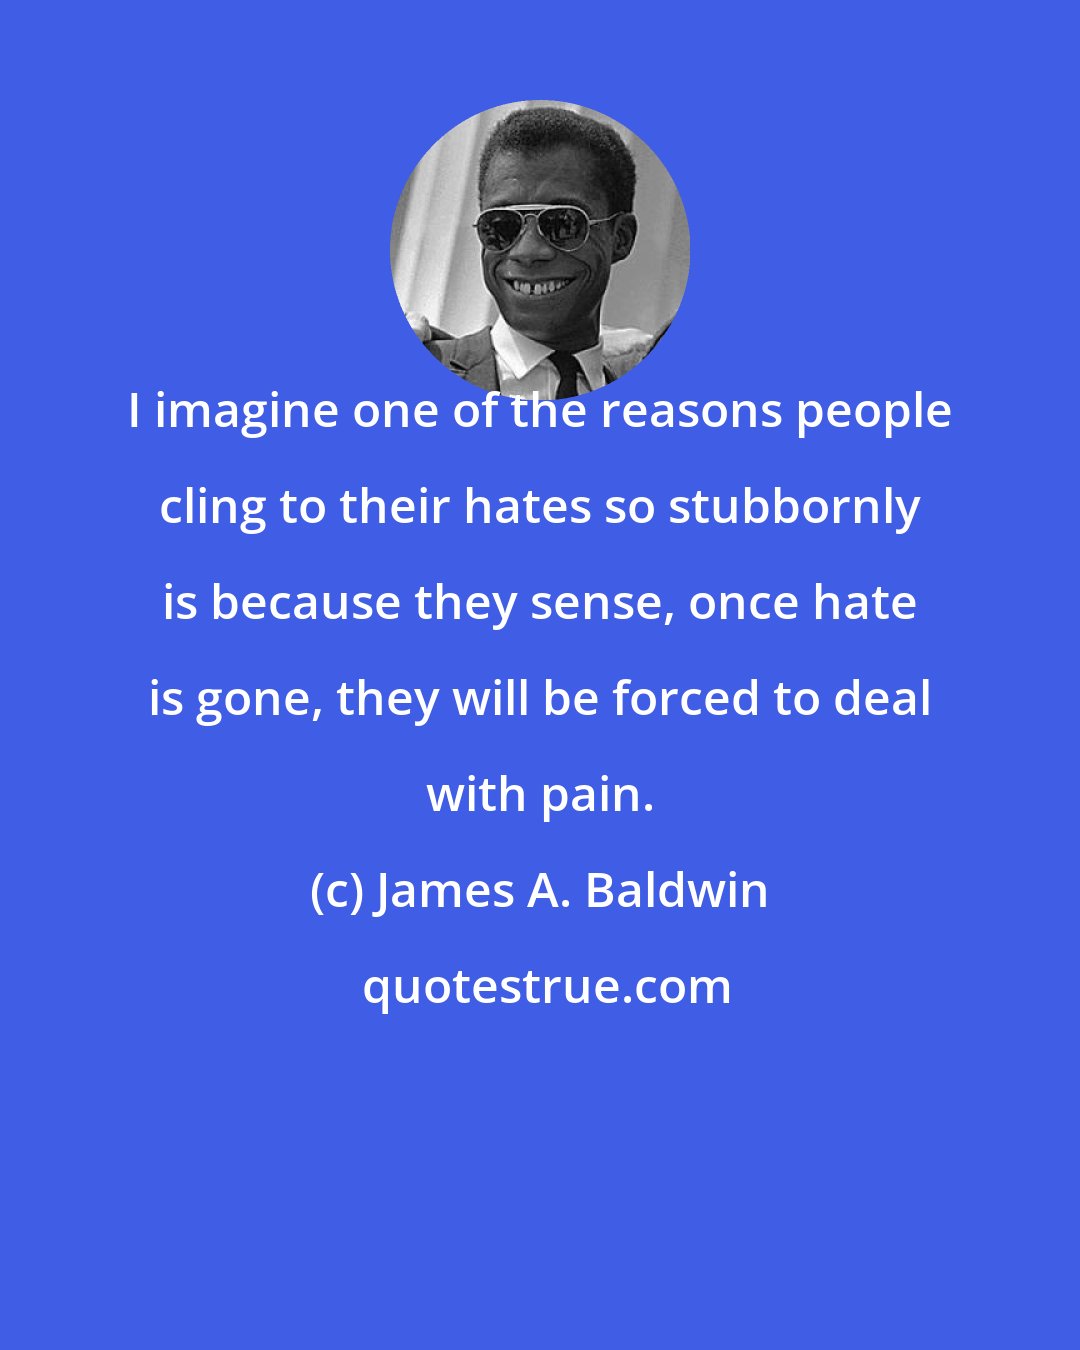 James A. Baldwin: I imagine one of the reasons people cling to their hates so stubbornly is because they sense, once hate is gone, they will be forced to deal with pain.